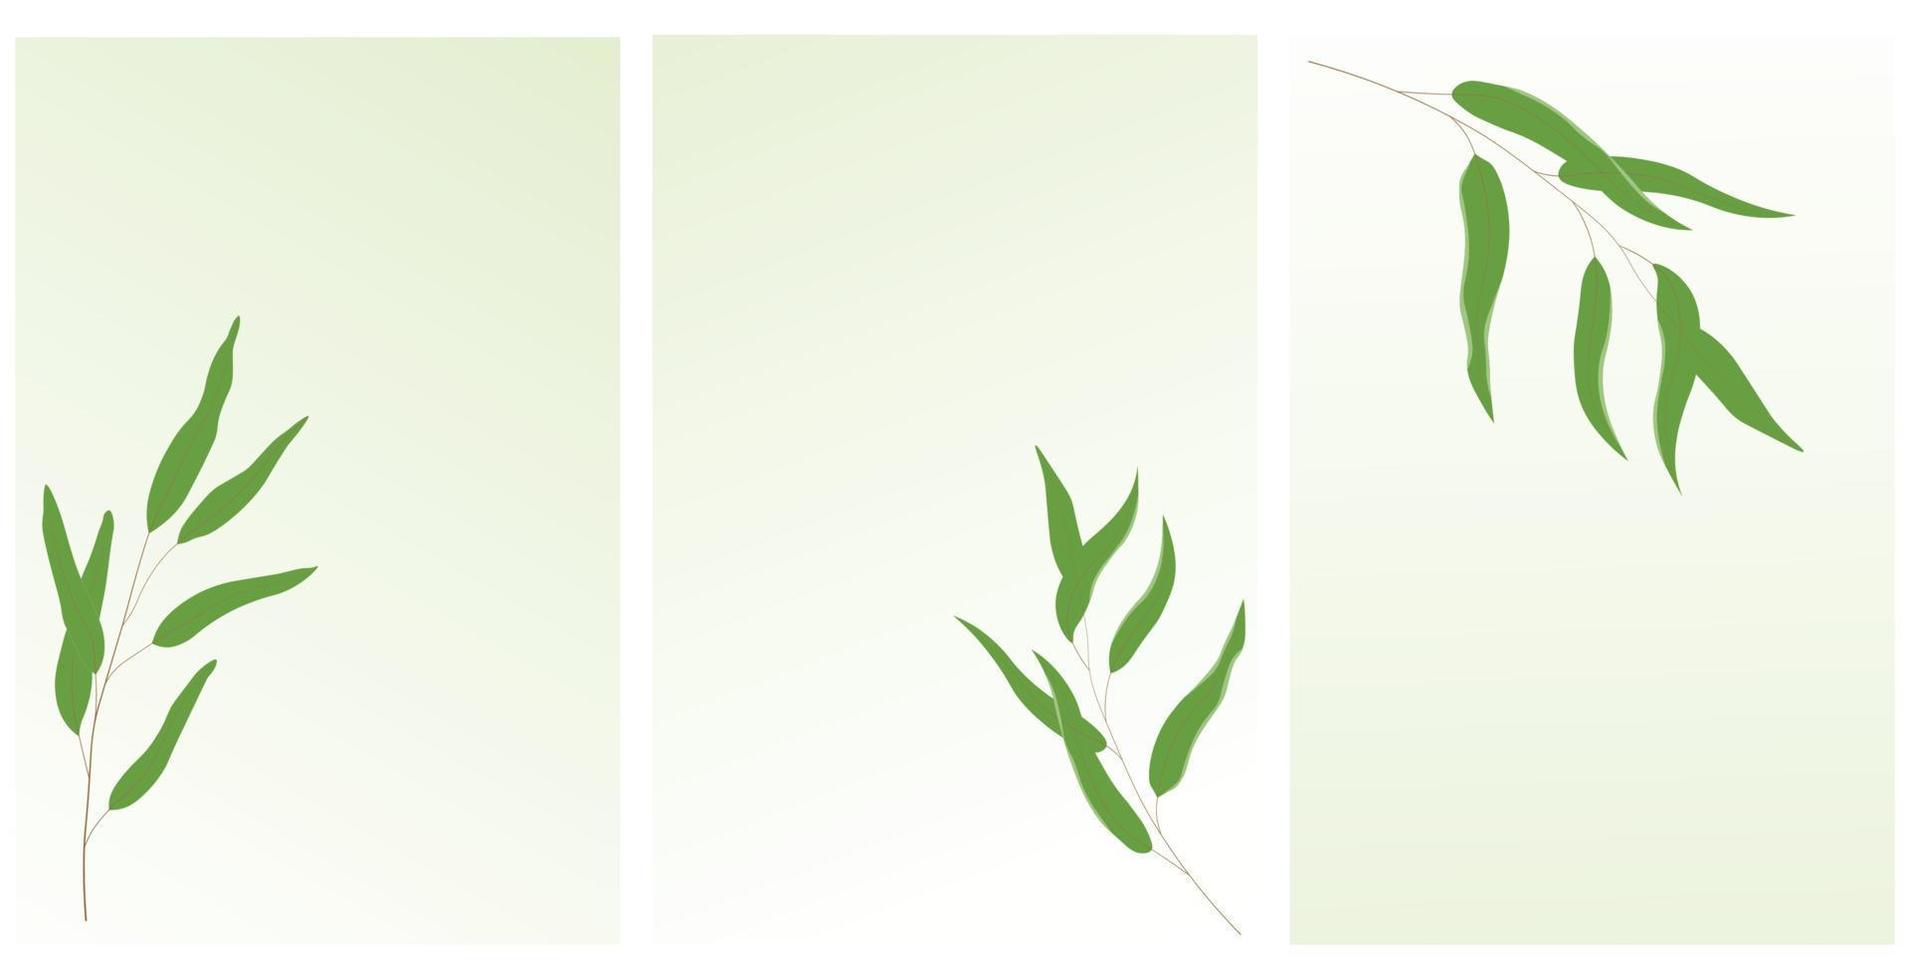 Willow branch. Botanical posters in minimalism. Exquisite green leaves. Vector stock illustration. Isolated on a white background.